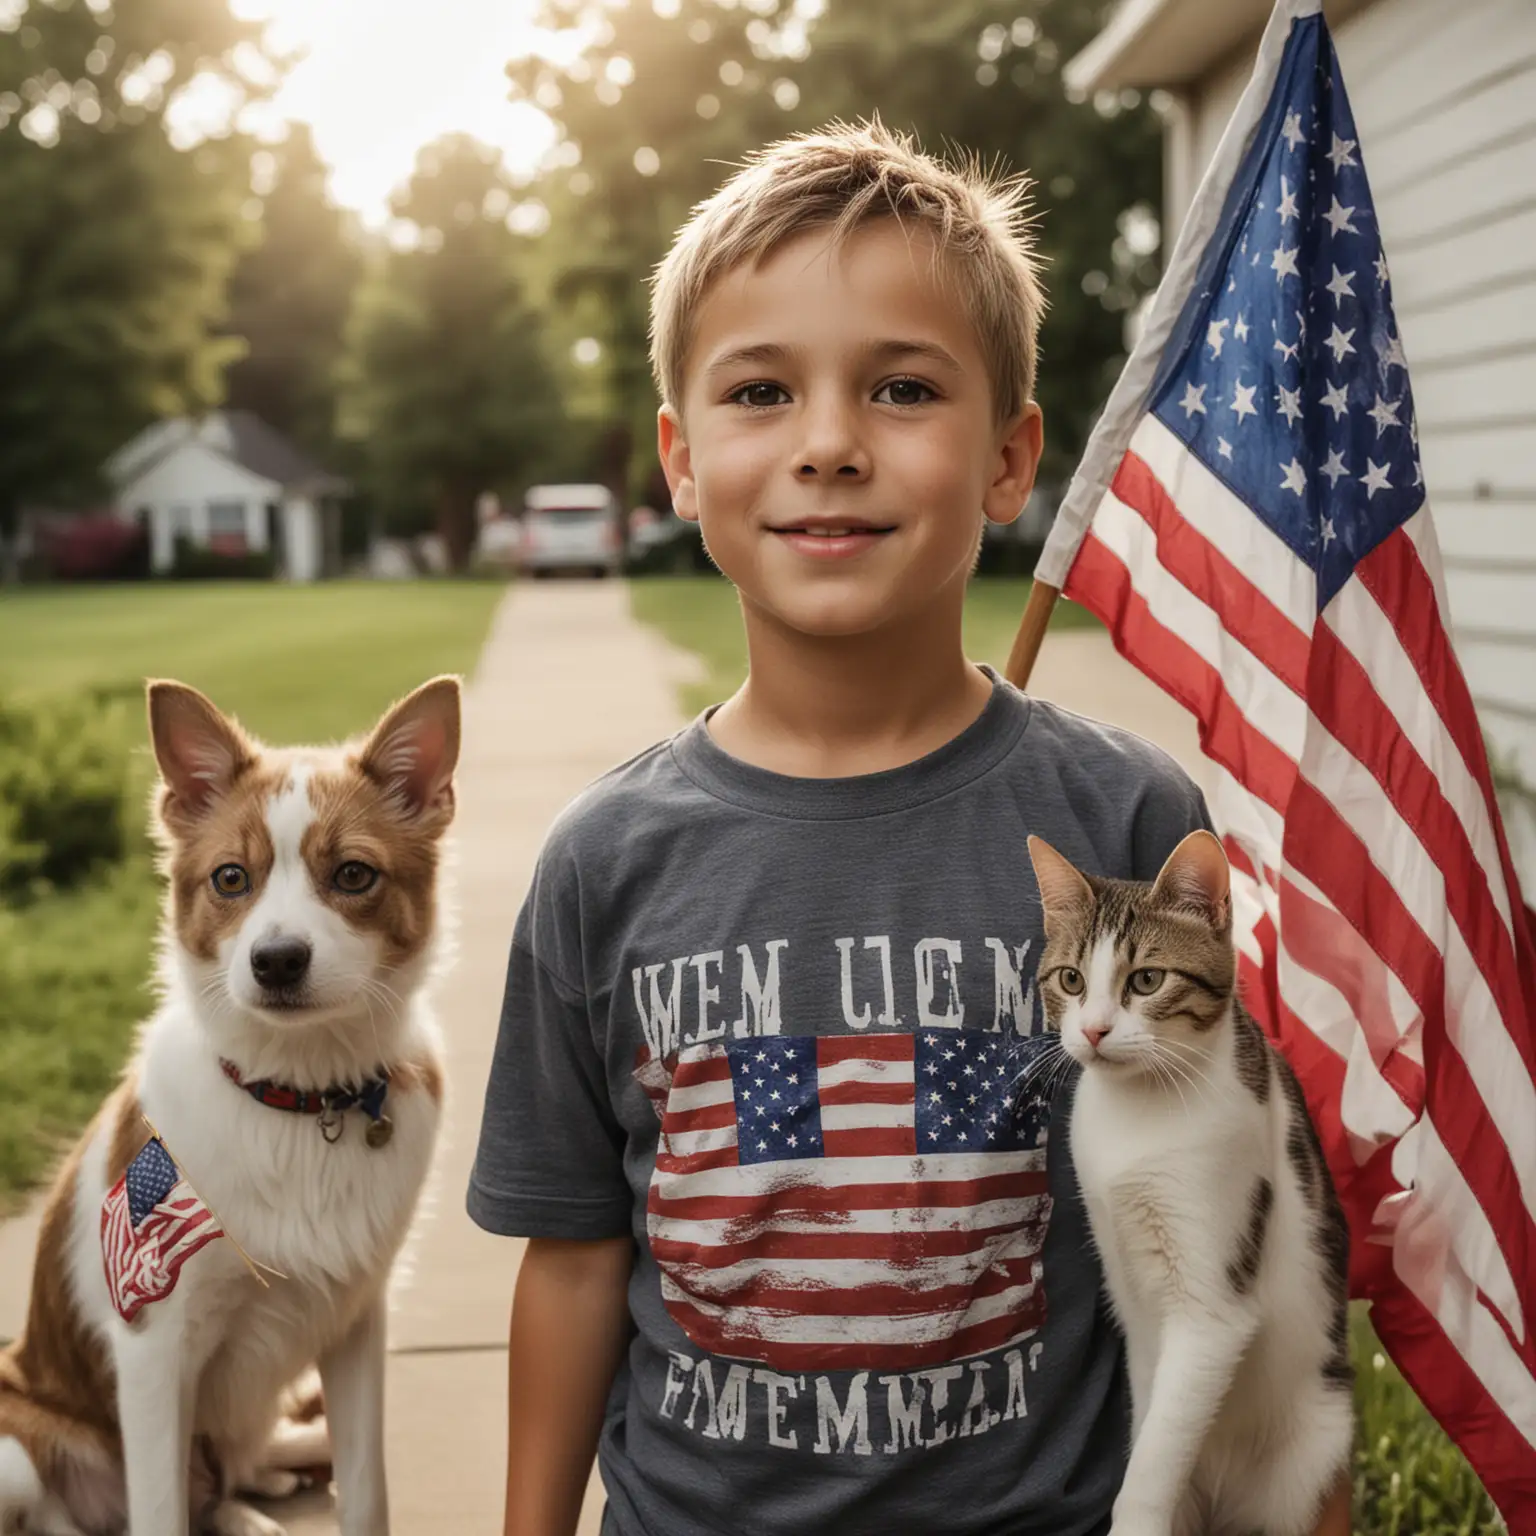 one young boy, with a T-shirt with an American Flag on it, outdoors with a dog and cat, an  American flag in the background